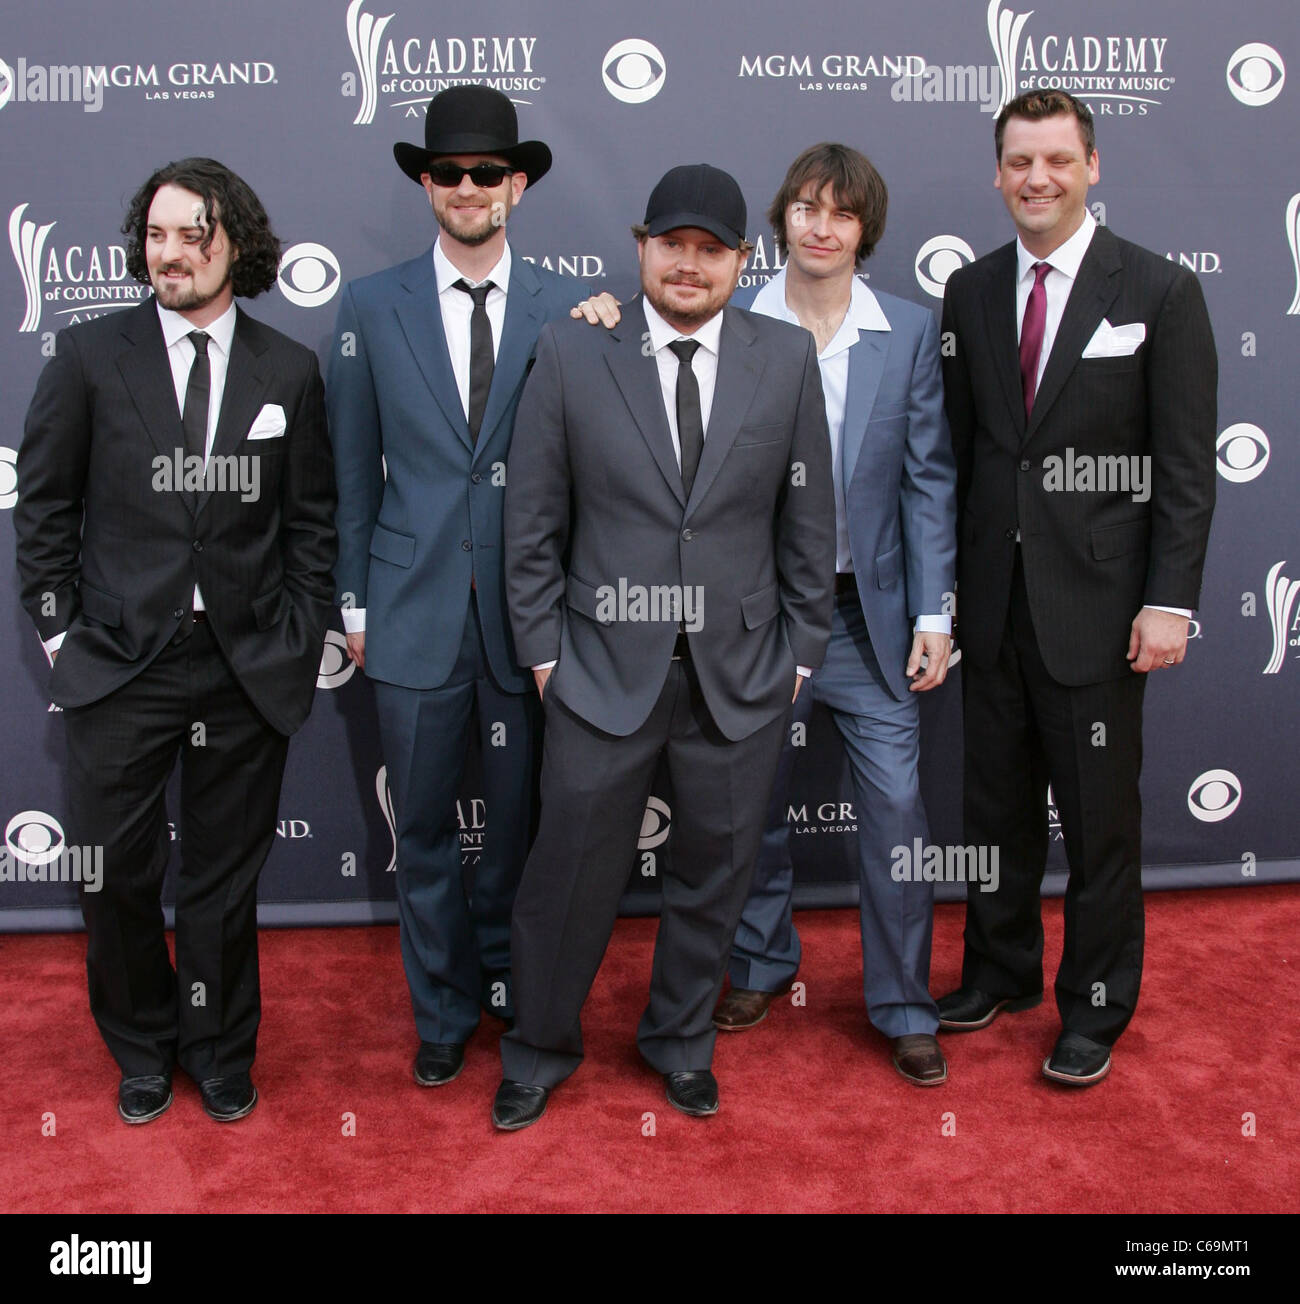 Randy Rogers Band at arrivals for Academy of Country Music ACM Awards 2011 - Arrivals, MGM Grand Garden Arena, Las Vegas, NV April 3, 2011. Photo By: James Atoa/Everett Collection Stock Photo